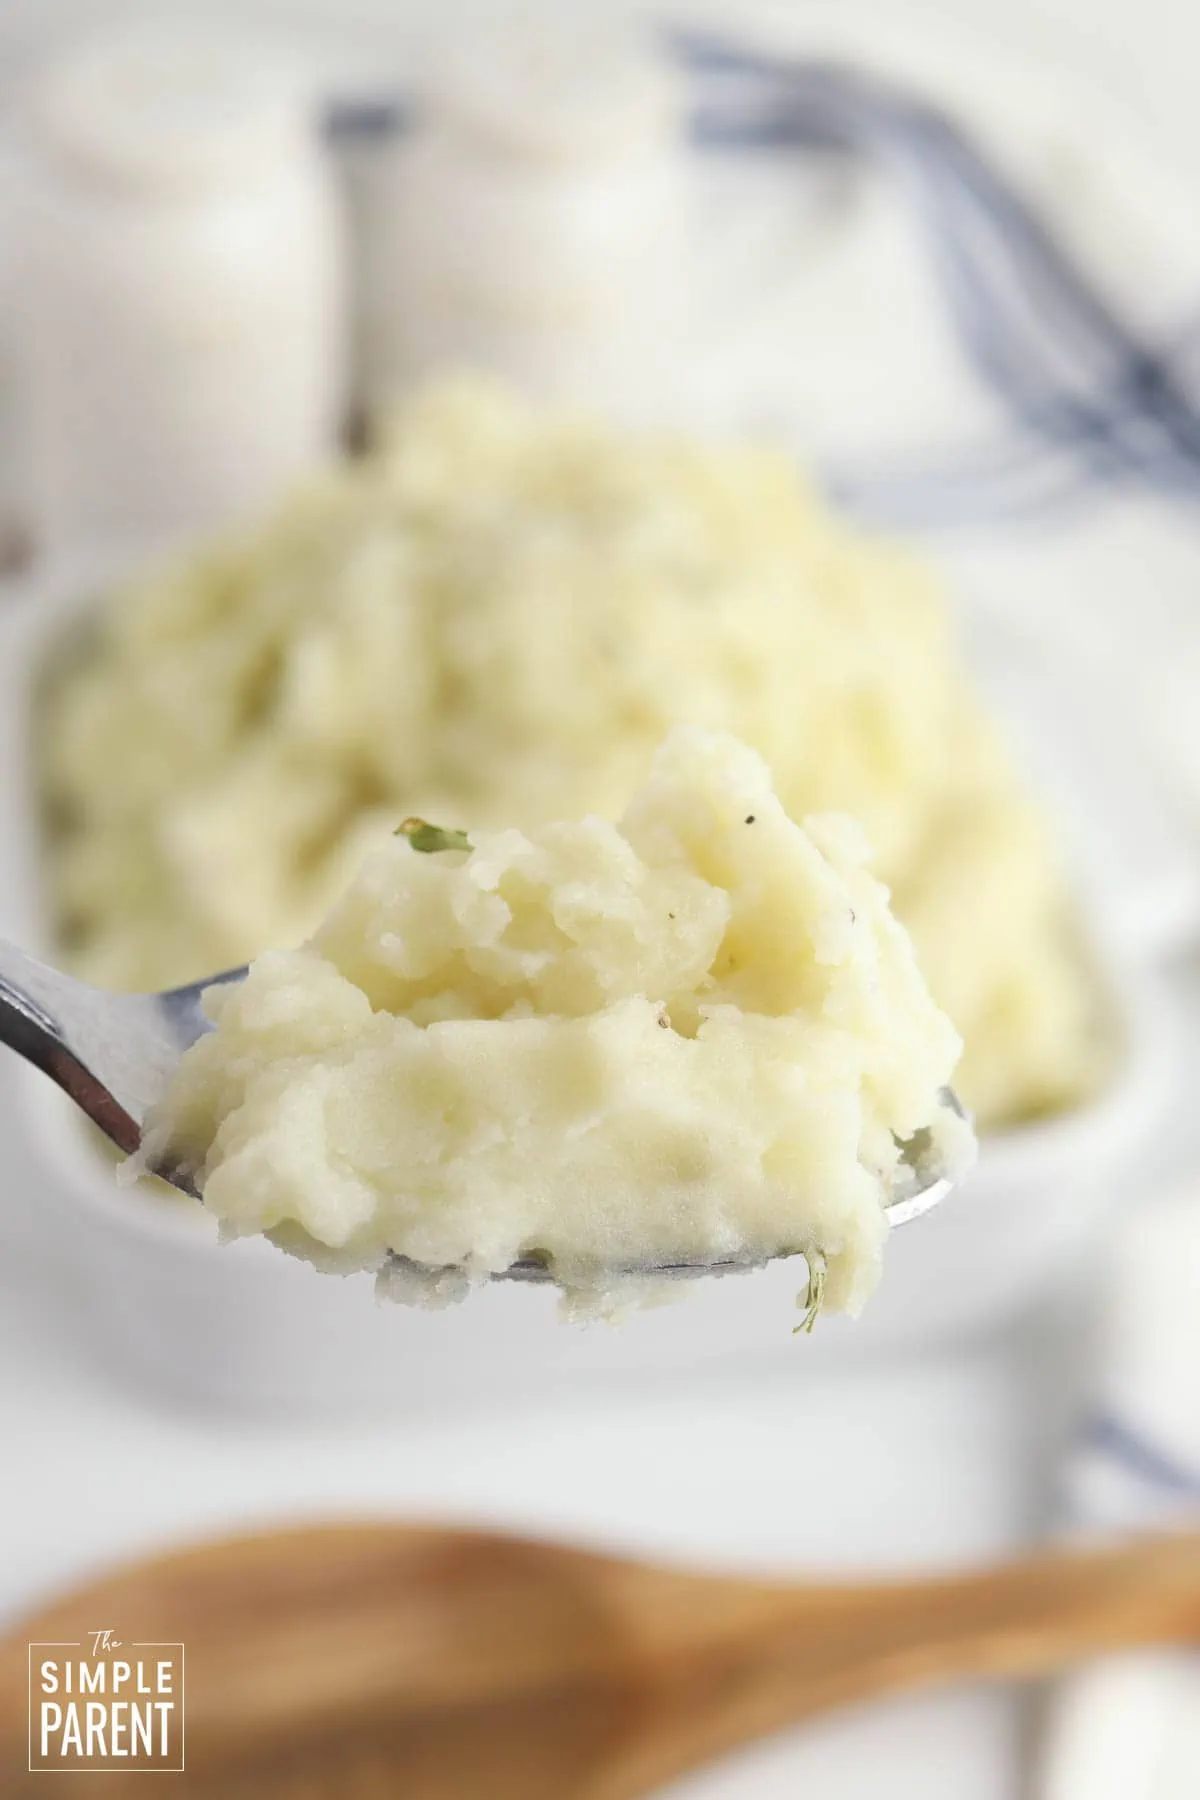 Spoonful of mashed potatoes